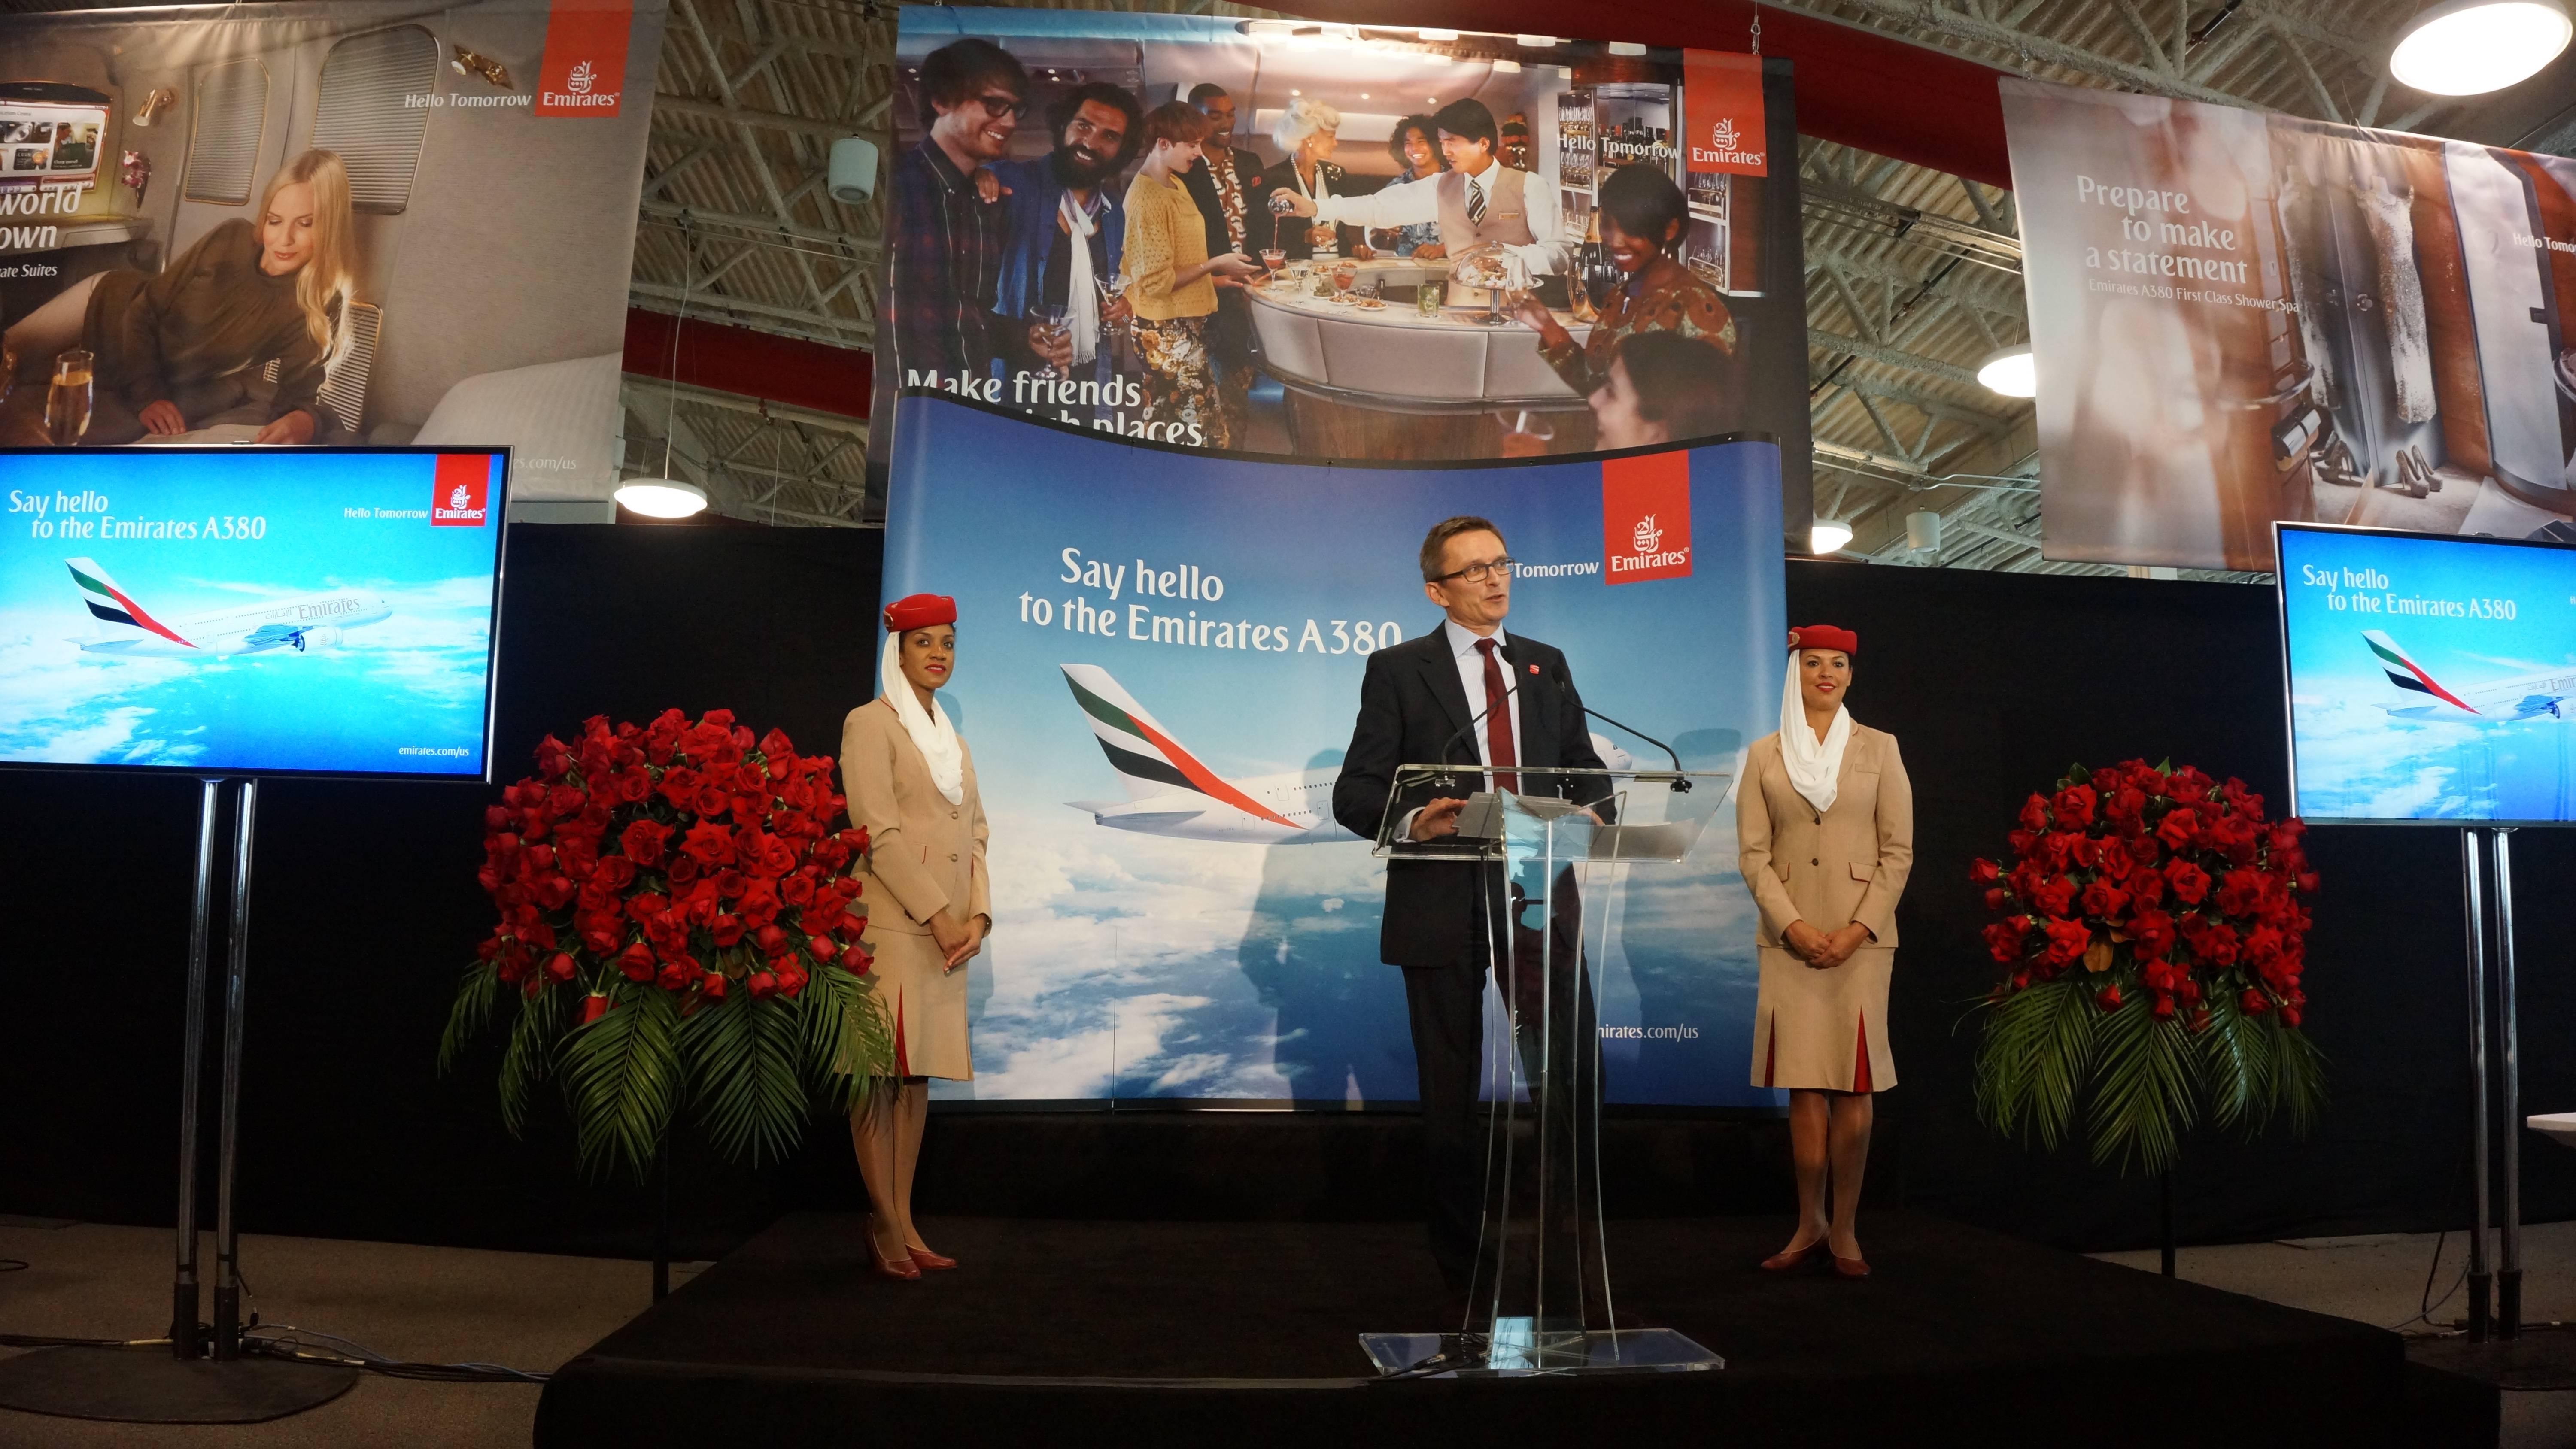 Hubert Frach, Emirates' Divisional Senior Vice President Commercial Operations West speaking after the arrival of the airline's A380 in Los Angeles